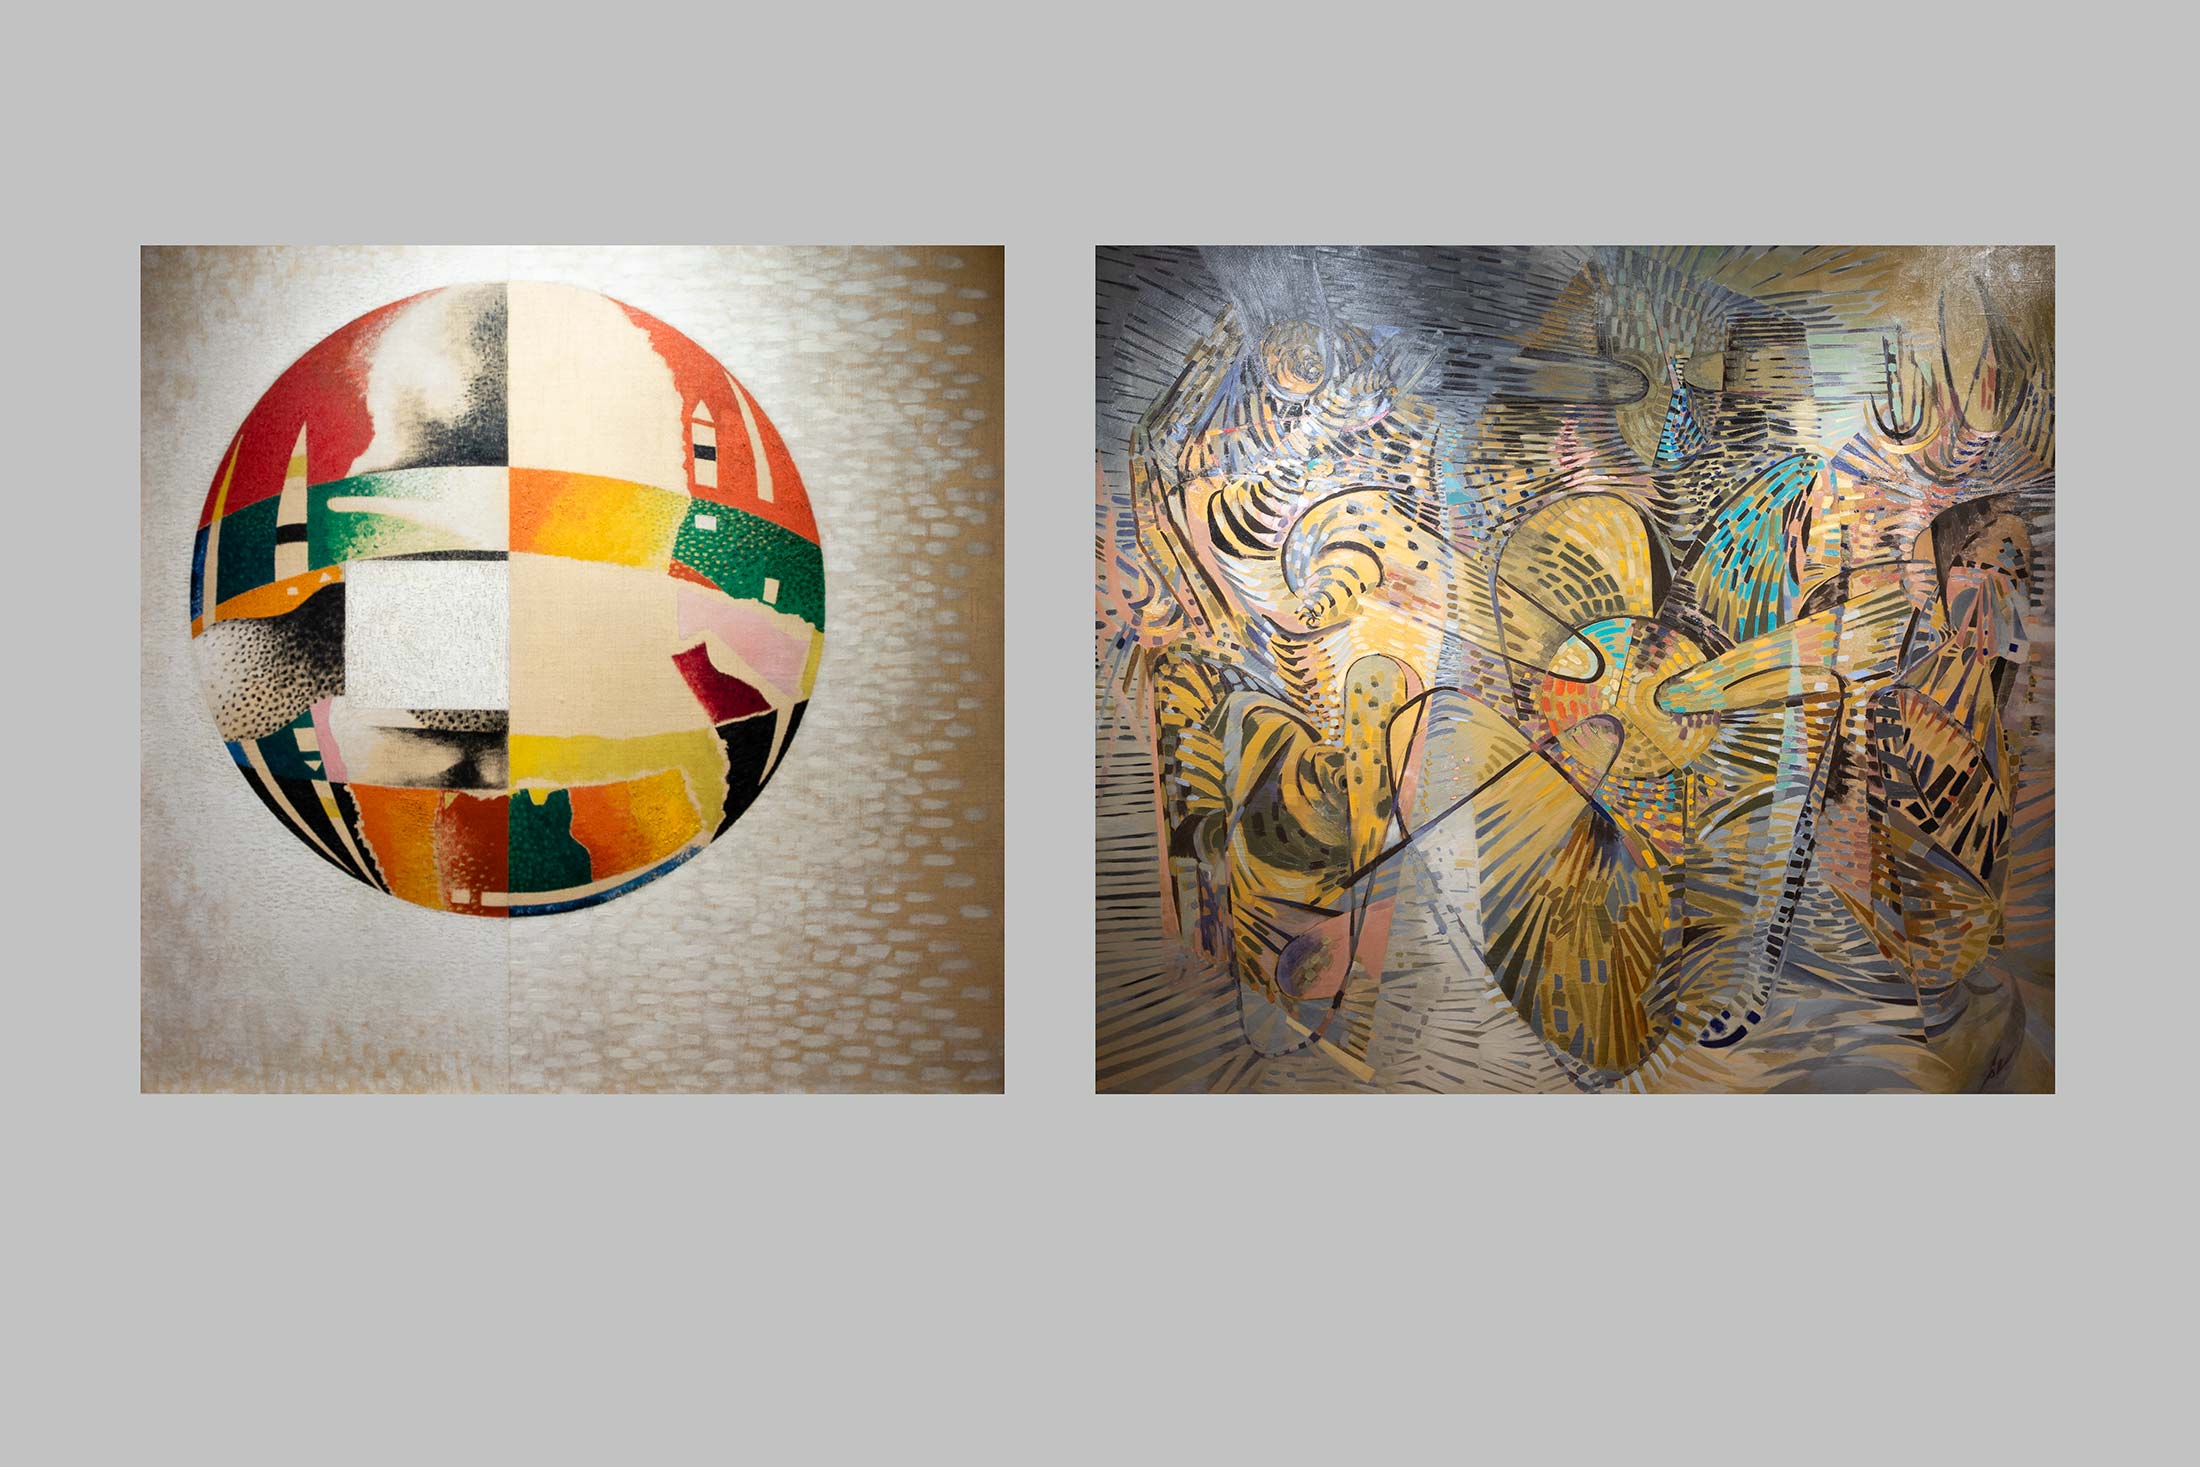 On the left: Nuclear II (1946) by László Moholy-Nagy; on the right: Les Cosmogones (1944), by Wolfgang Paalen. 